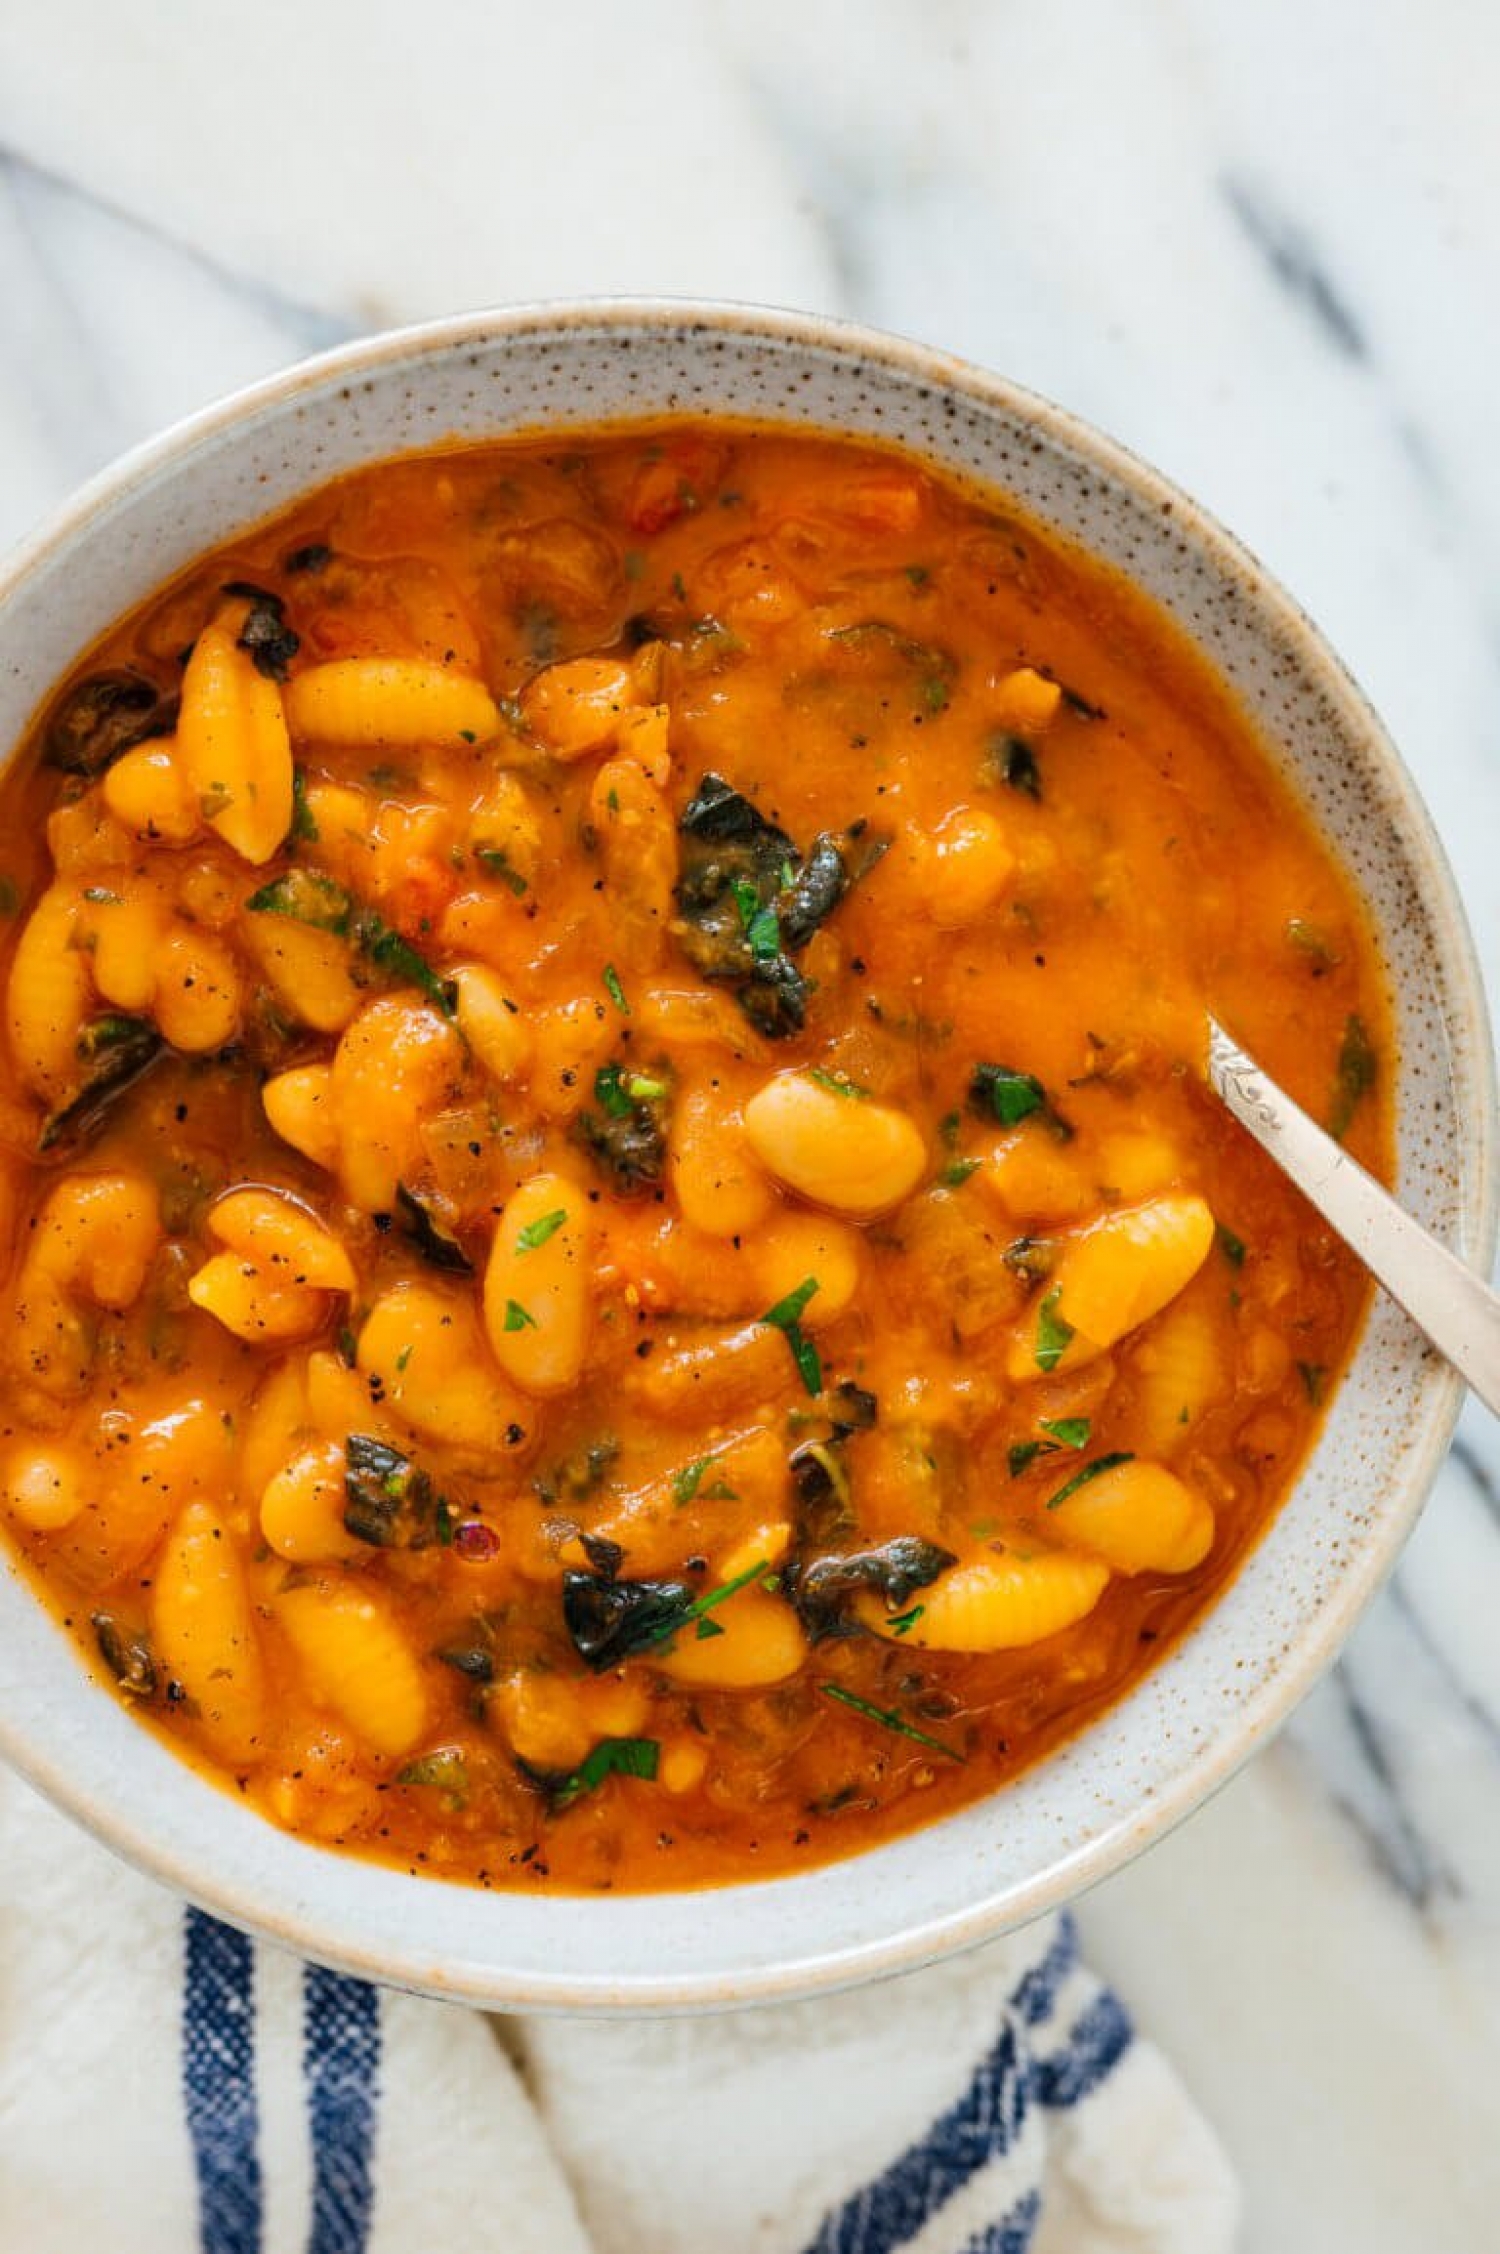 <p>You might have already tried this classic Italian soup at your local spot (or Olive Garden), but it's totally easy to make at home with canned white beans. <a href="https://cookieandkate.com/pasta-e-fagioli-recipe/" rel="noopener">This recipe</a> is ready in just one hour and makes plenty for big families or for smaller ones with leftovers.</p>